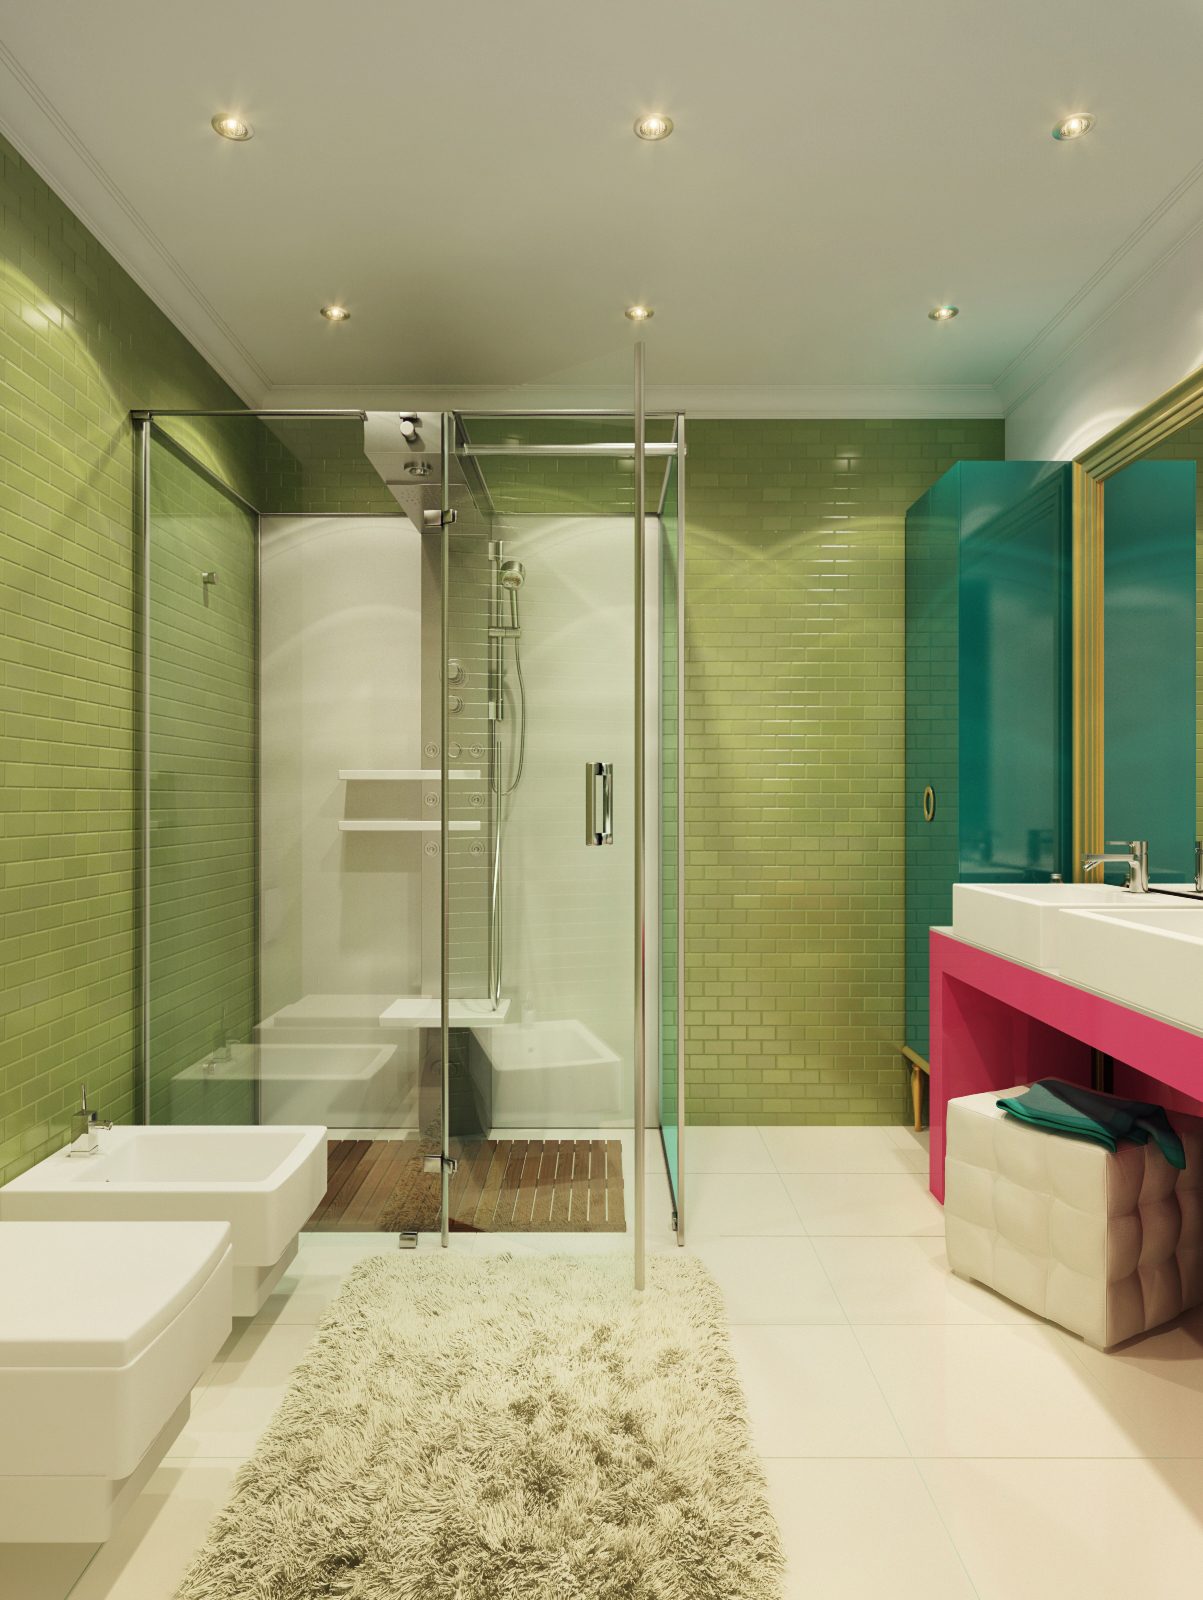 simple bathroom green tile design "width =" 1203 "height =" 1600 "srcset =" https://mileray.com/wp-content/uploads/2020/05/1588516379_664_Best-Ideas-To-Create-Simple-Bathroom-Designs-With-Variety-of.jpg 1203w, https: // myfashionos. com / wp-content / uploads / 2016/09 / Dmitriy-Schuka-226x300.jpg 226w, https://mileray.com/wp-content/uploads/2016/09/Dmitriy-Schuka-768x1021.jpg 768w, https: //mileray.com/wp-content/uploads/2016/09/Dmitriy-Schuka-770x1024.jpg 770w, https://mileray.com/wp-content/uploads/2016/09/Dmitriy-Schuka-696x926.jpg 696w, https://mileray.com/wp-content/uploads/2016/09/Dmitriy-Schuka-1068x1420.jpg 1068w, https://mileray.com/wp-content/uploads/2016/09/Dmitriy-Schuka -316x420.jpg 316w "sizes =" (maximum width: 1203px) 100vw, 1203px